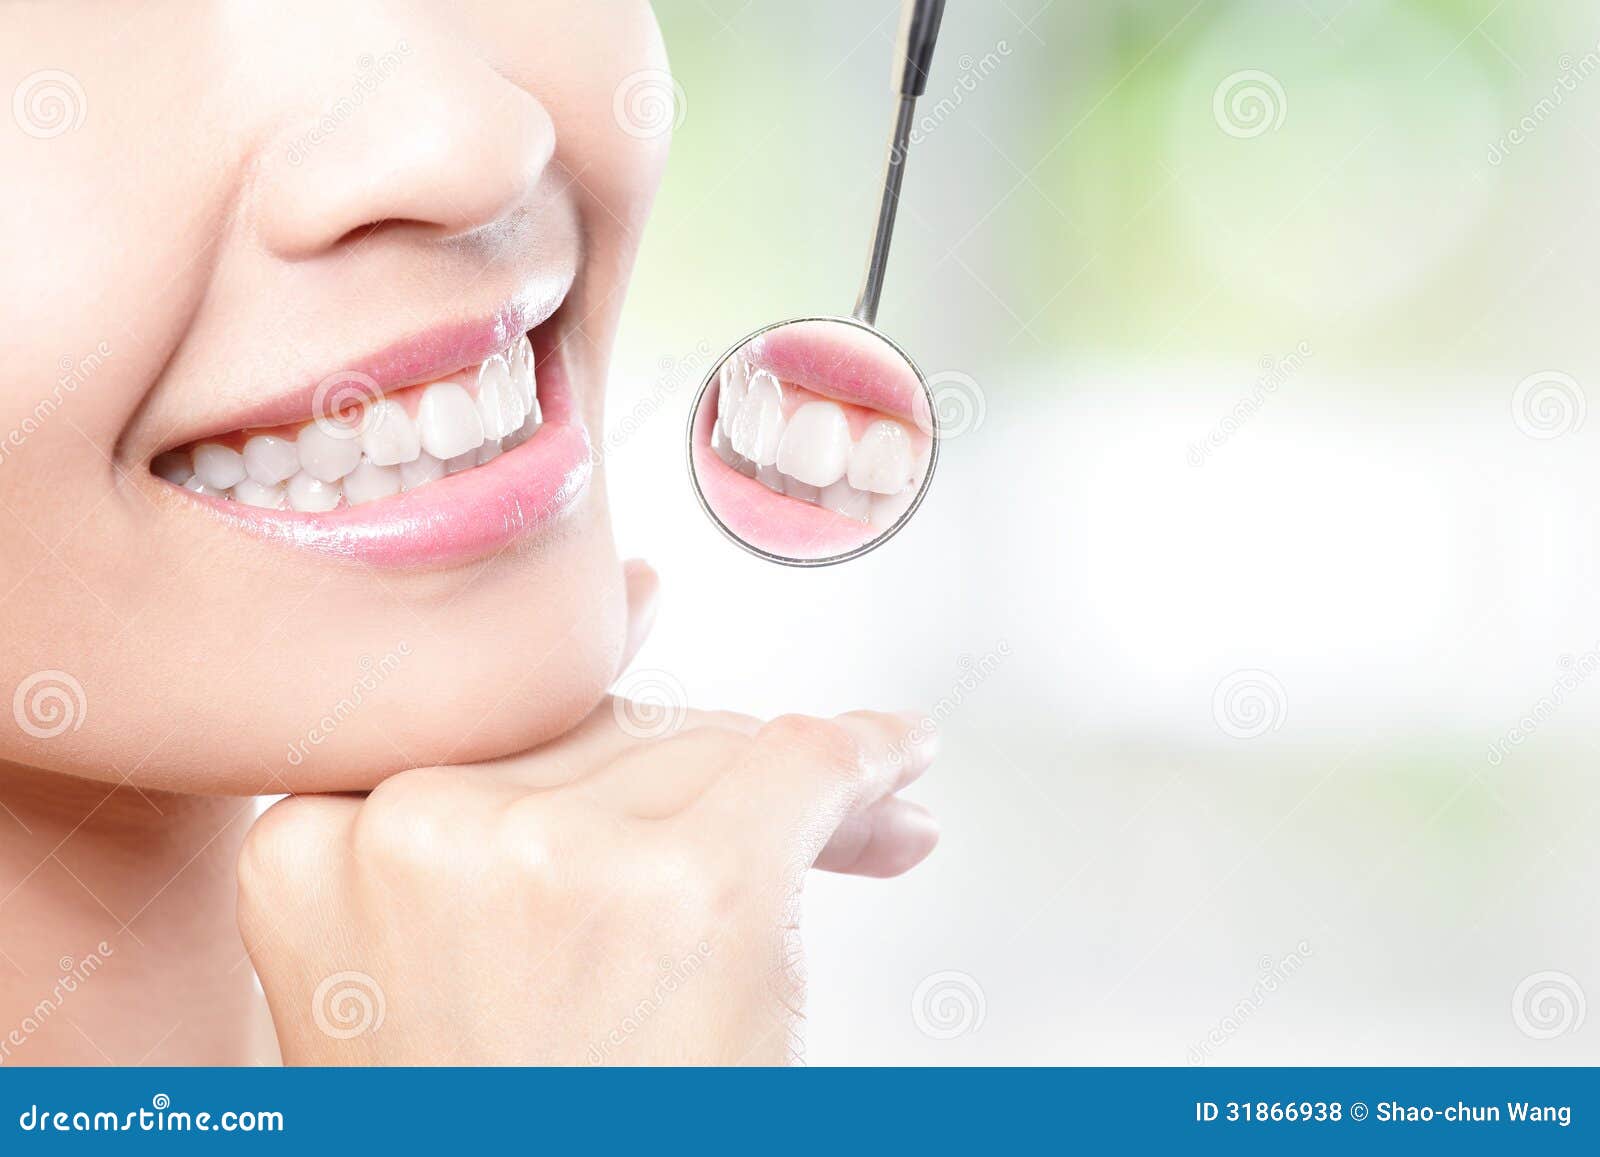 healthy woman teeth and dentist mouth mirror